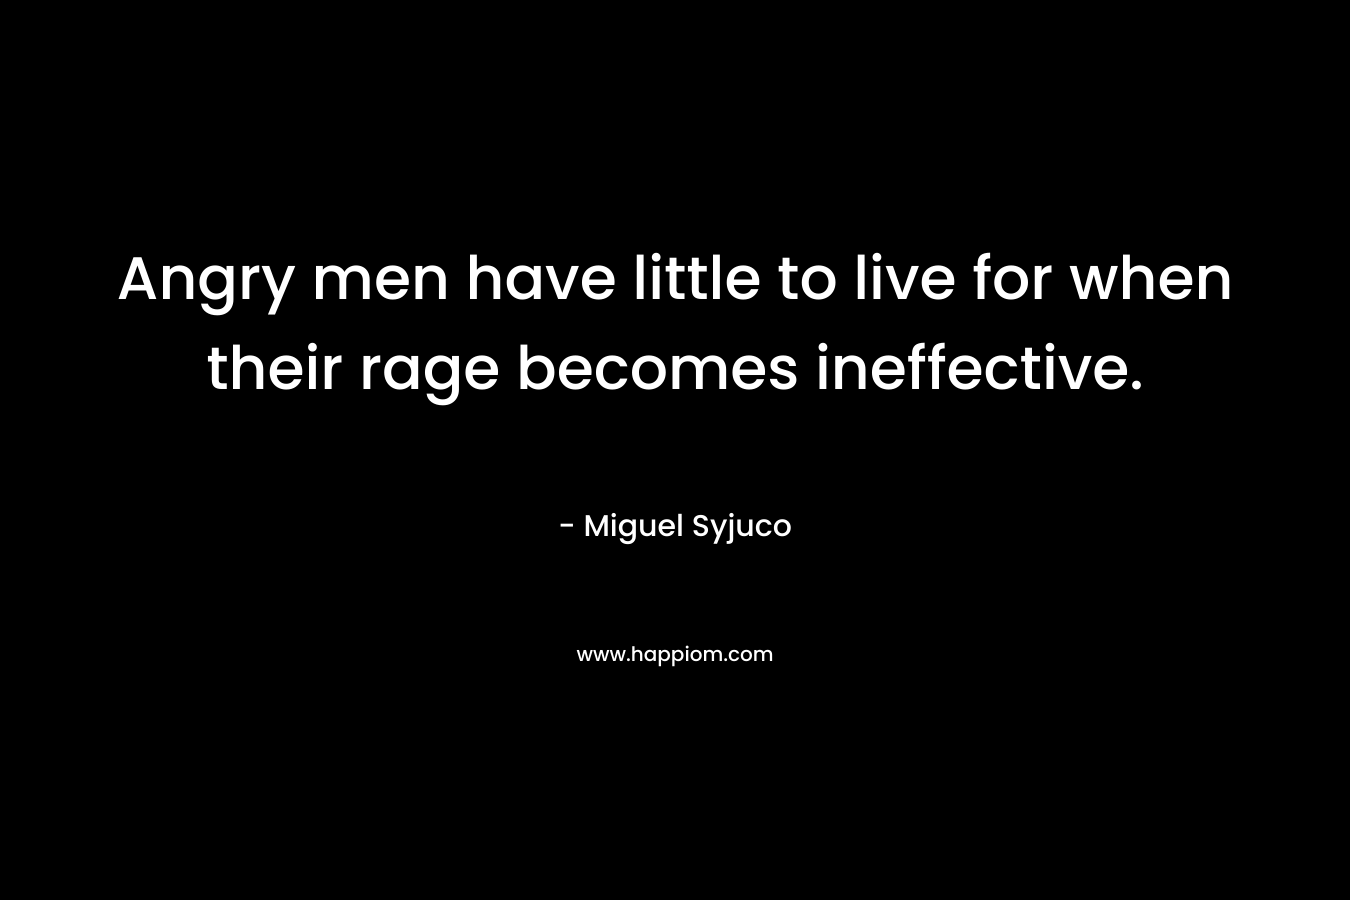 Angry men have little to live for when their rage becomes ineffective. – Miguel Syjuco